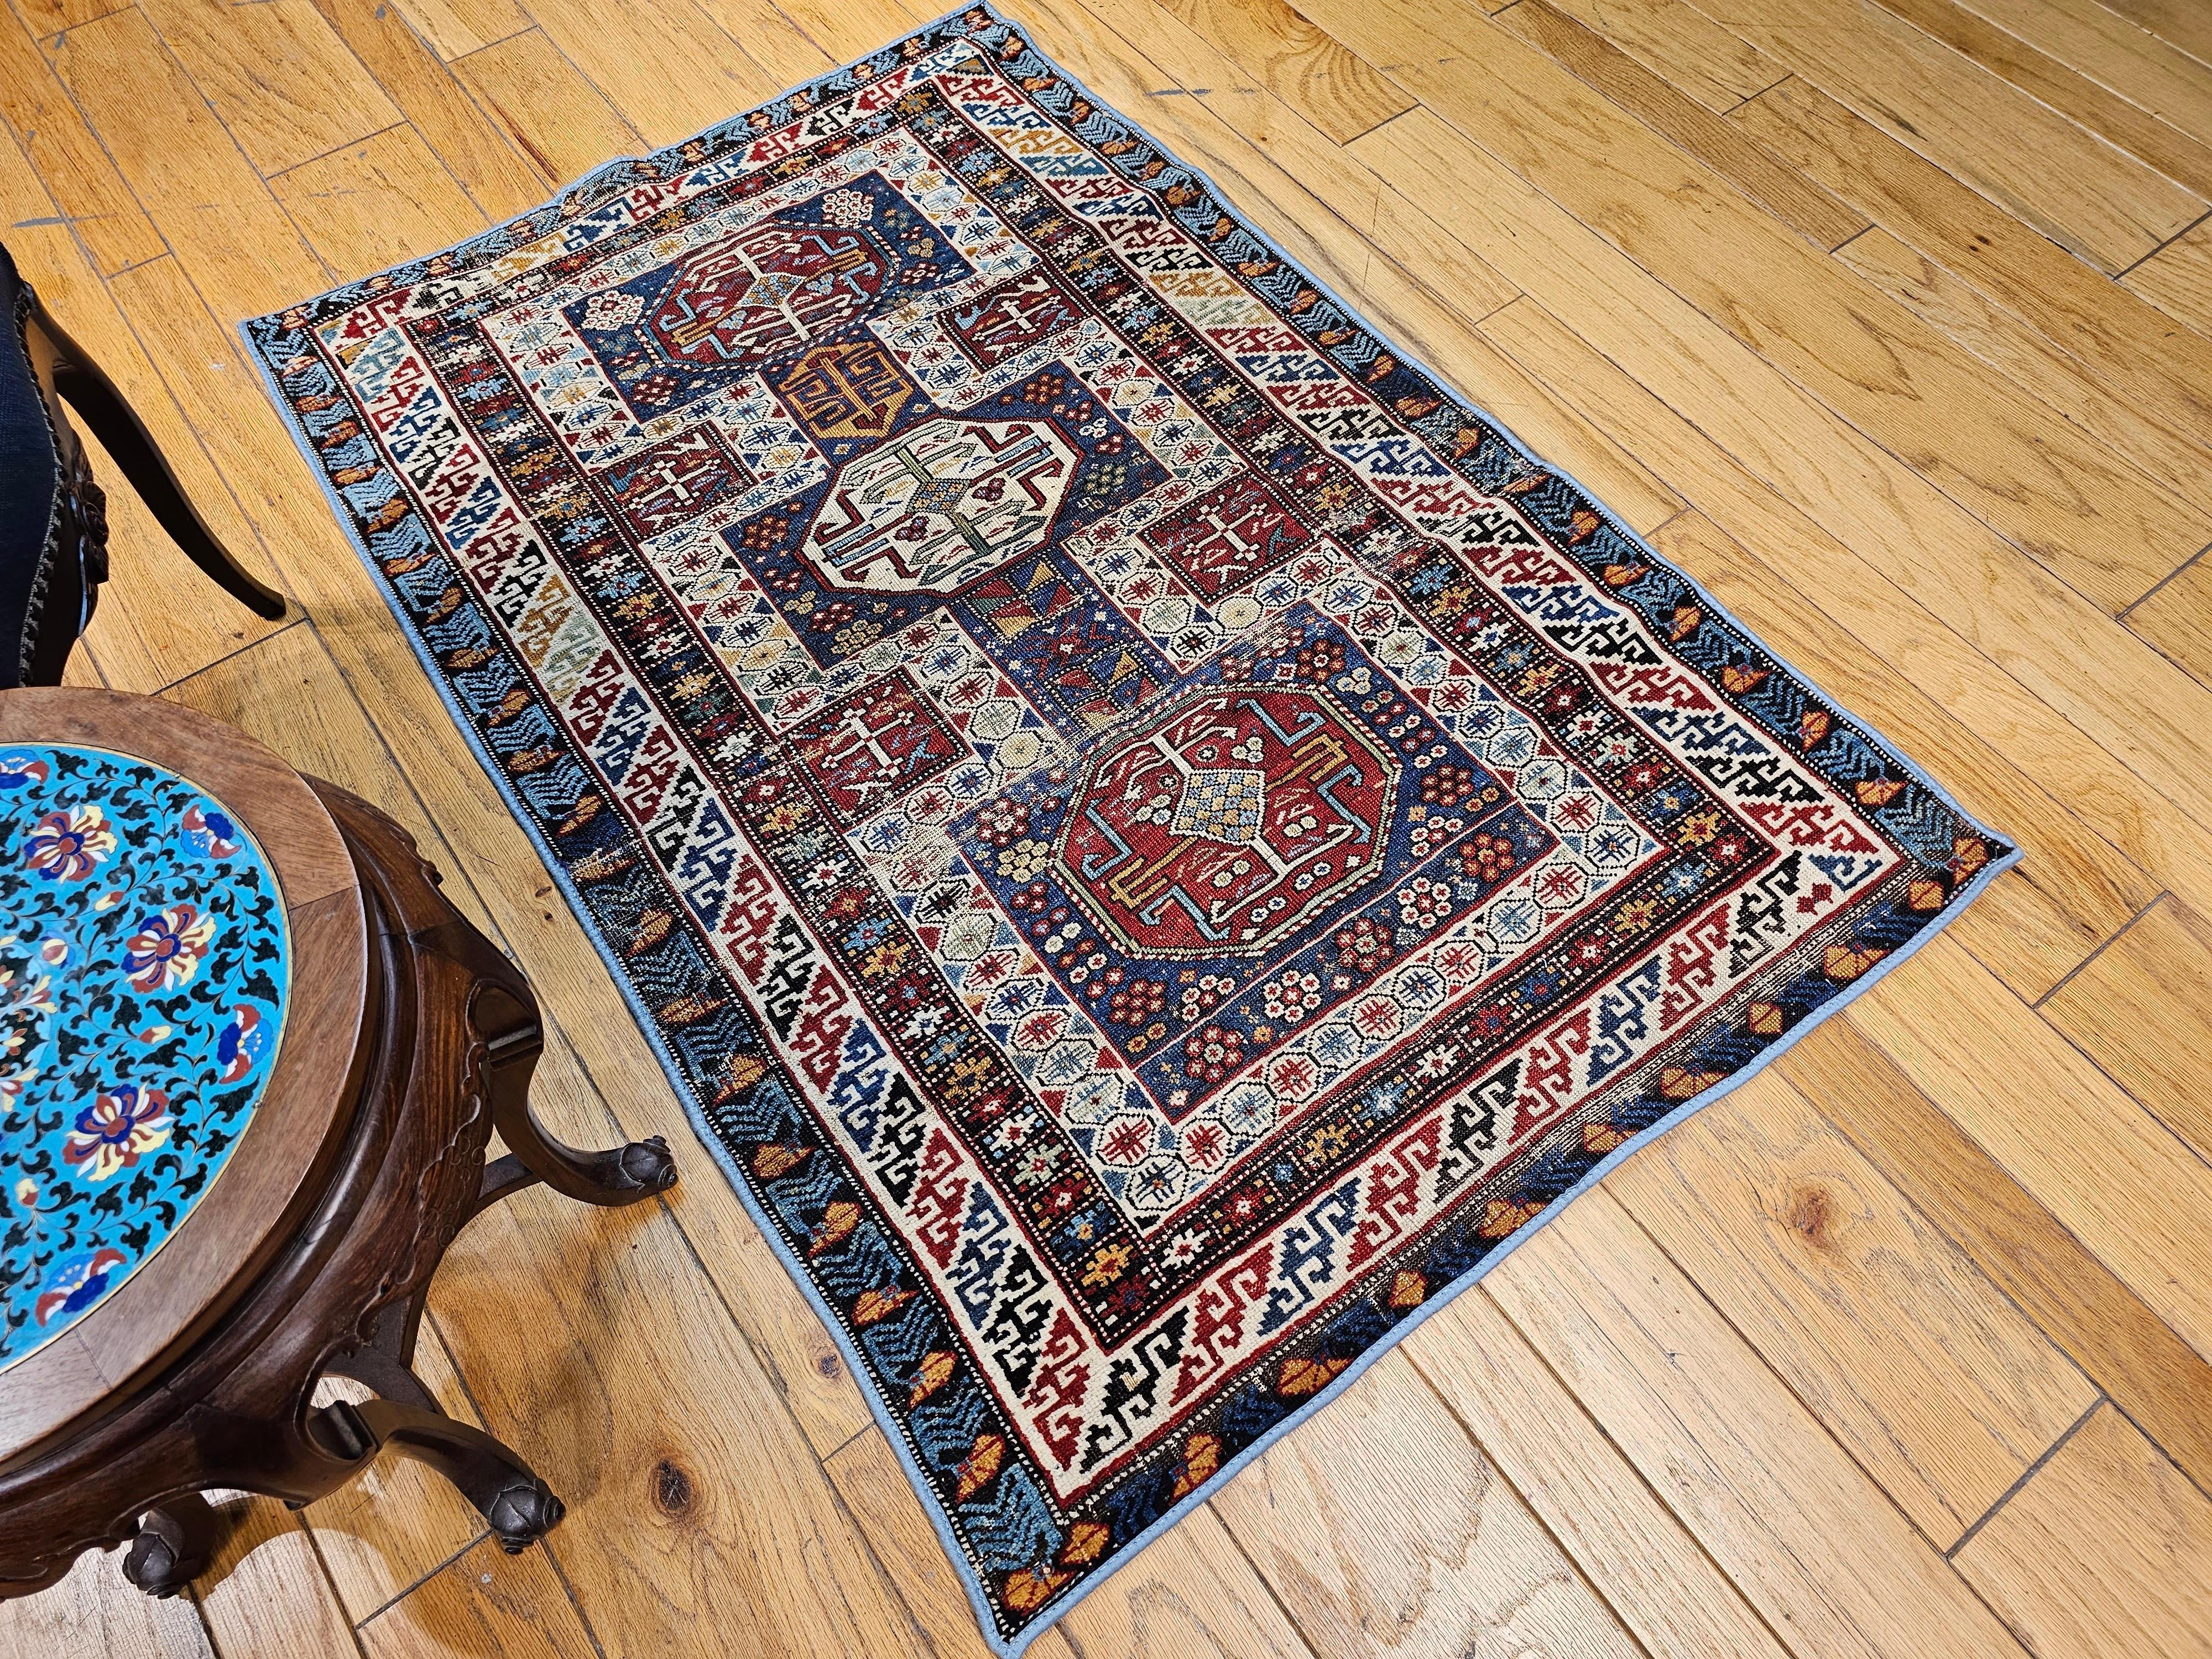  Early 1900s Caucasian Kuba Area Rug in French Blue, Red, Ivory, Yellow For Sale 8